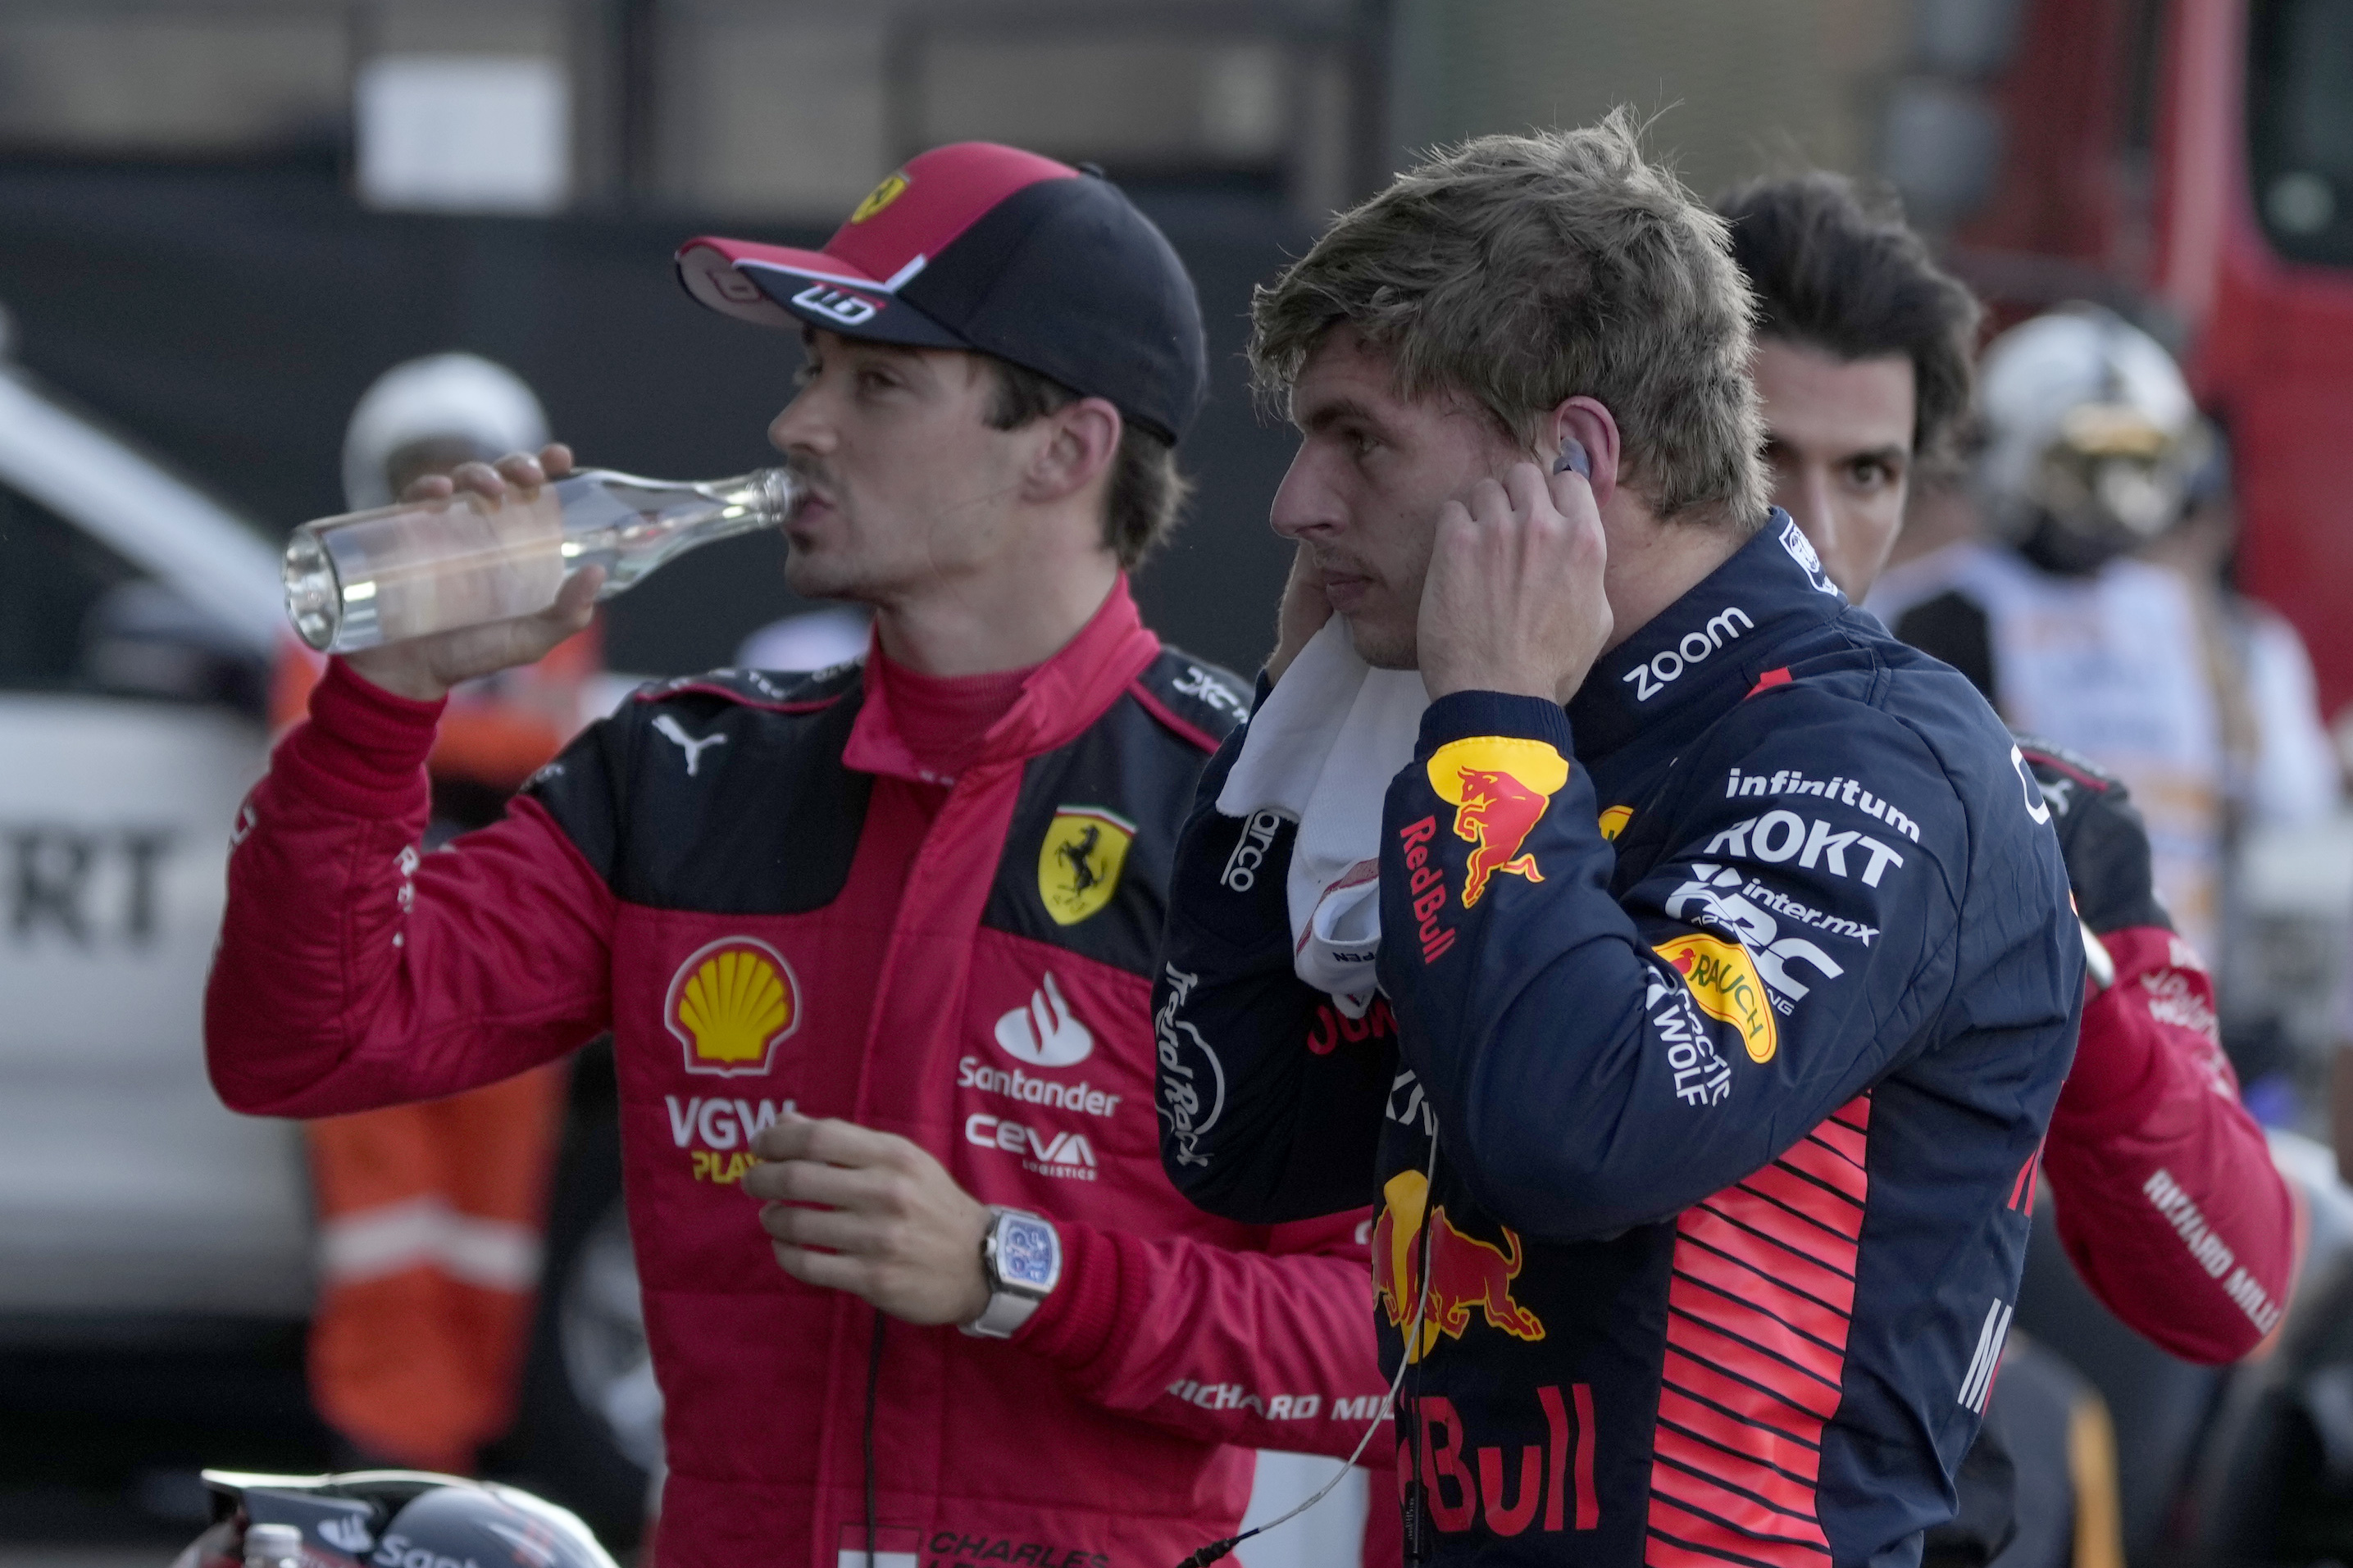 Leclerc pipped Max Verstappen to pole position in Mexico City